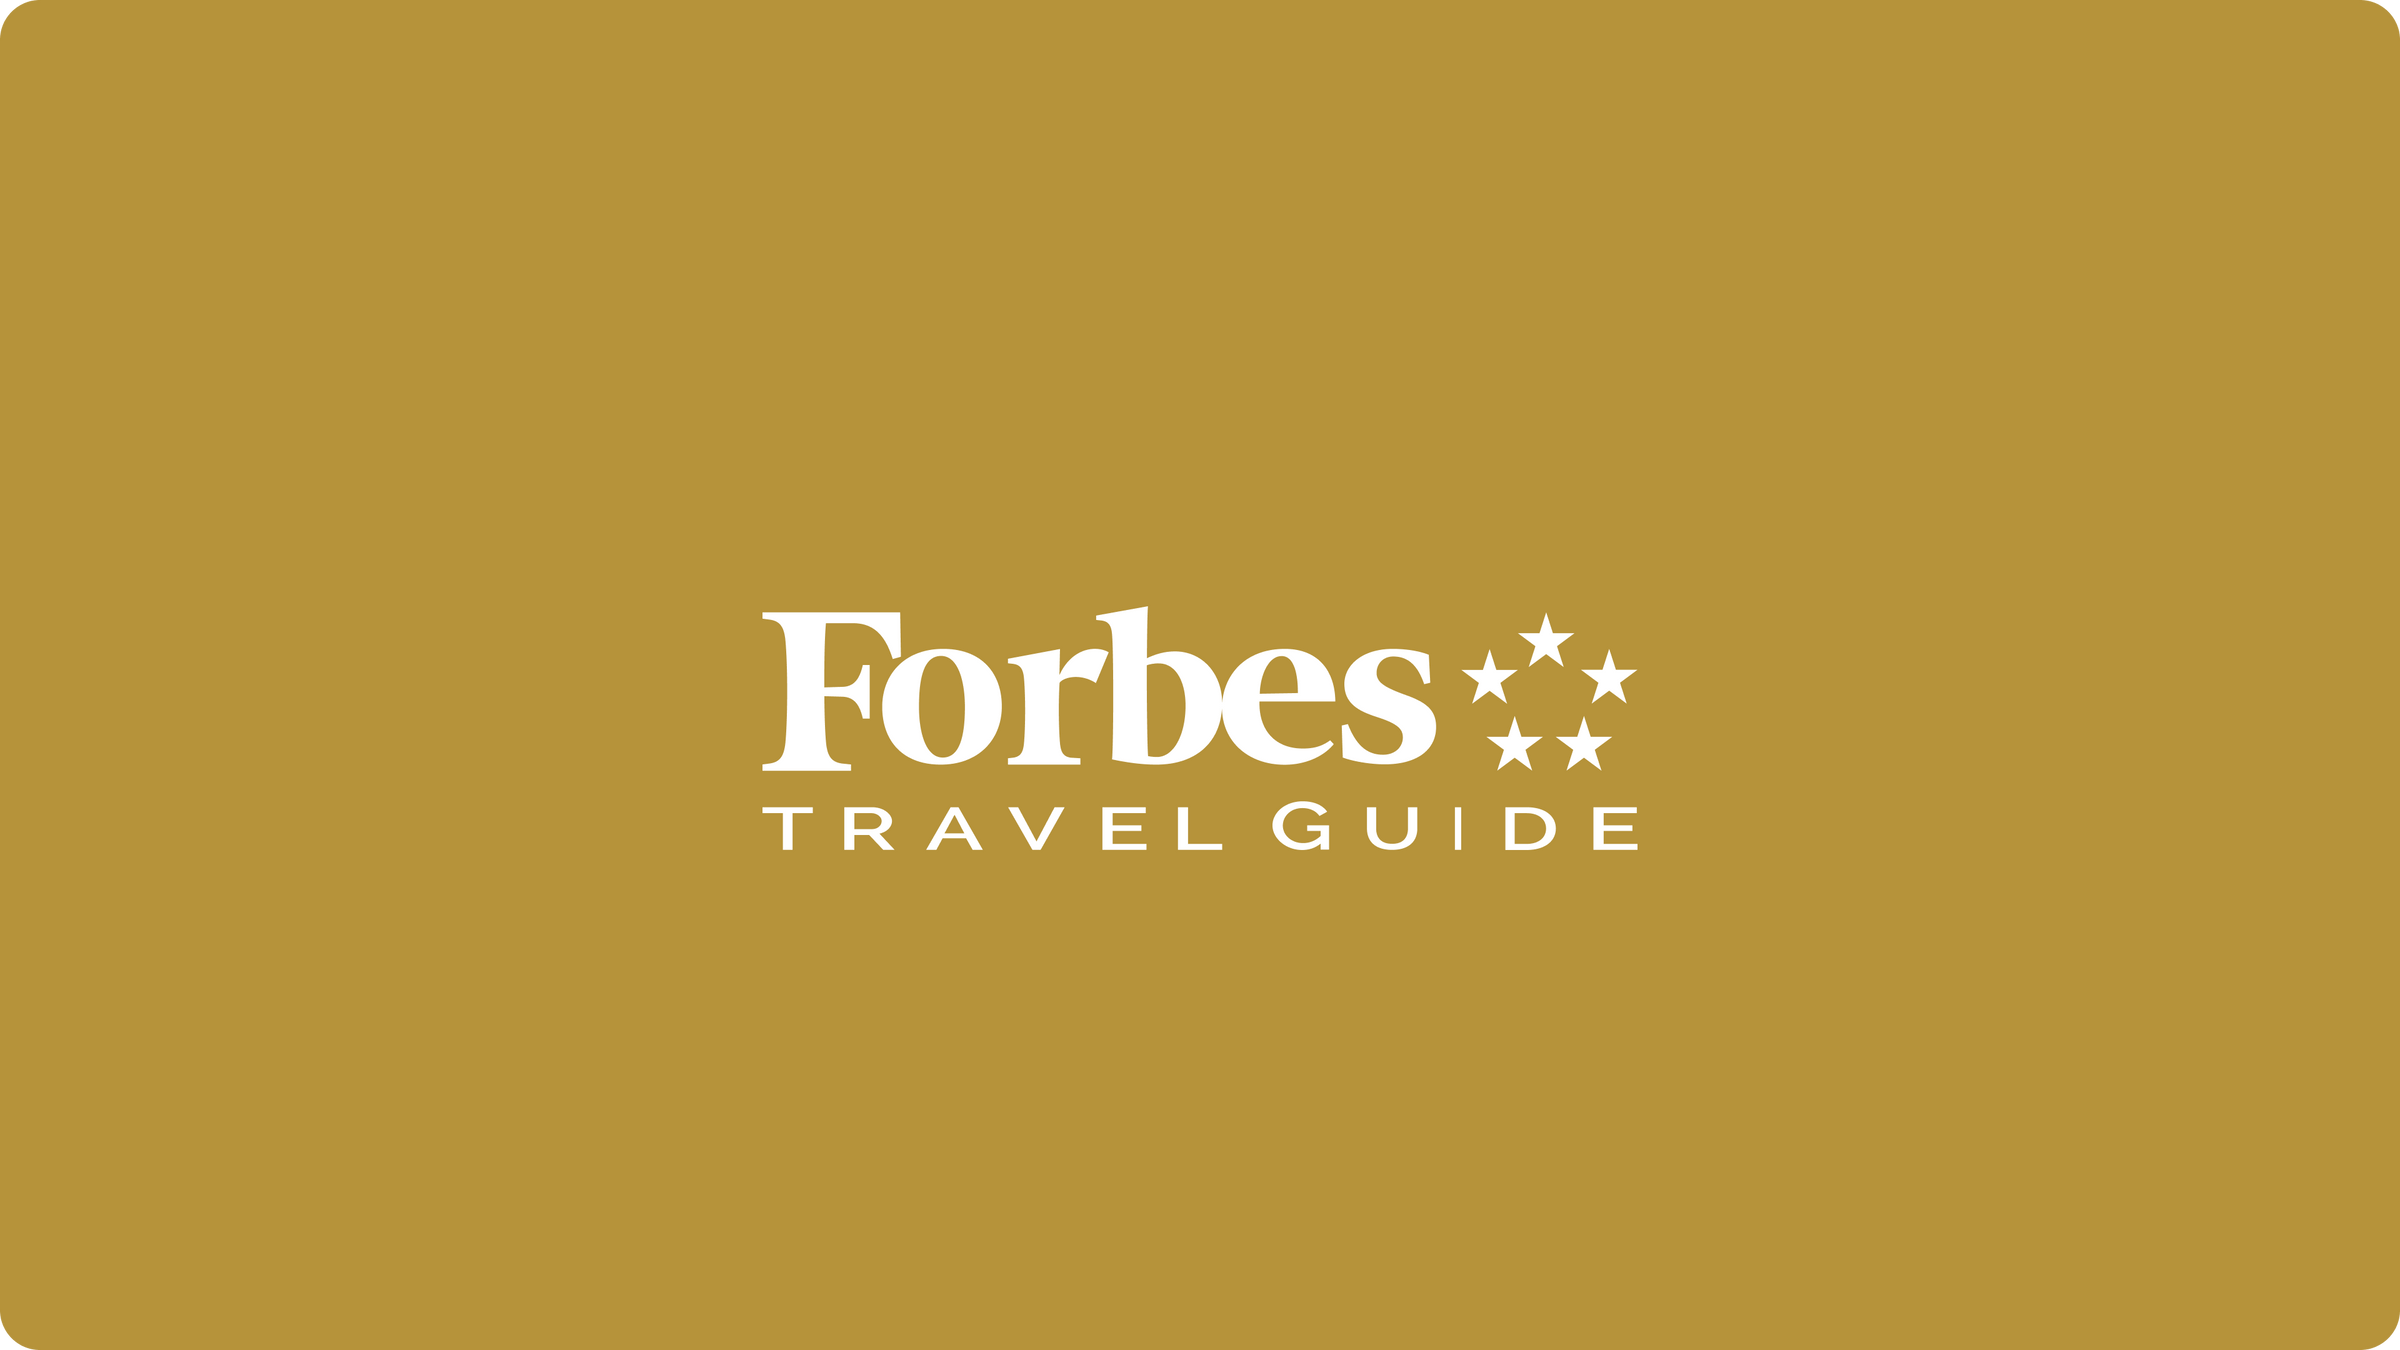 Selfbook Listed as Forbes Travel Guide Brand Official For Second Consecutive Year